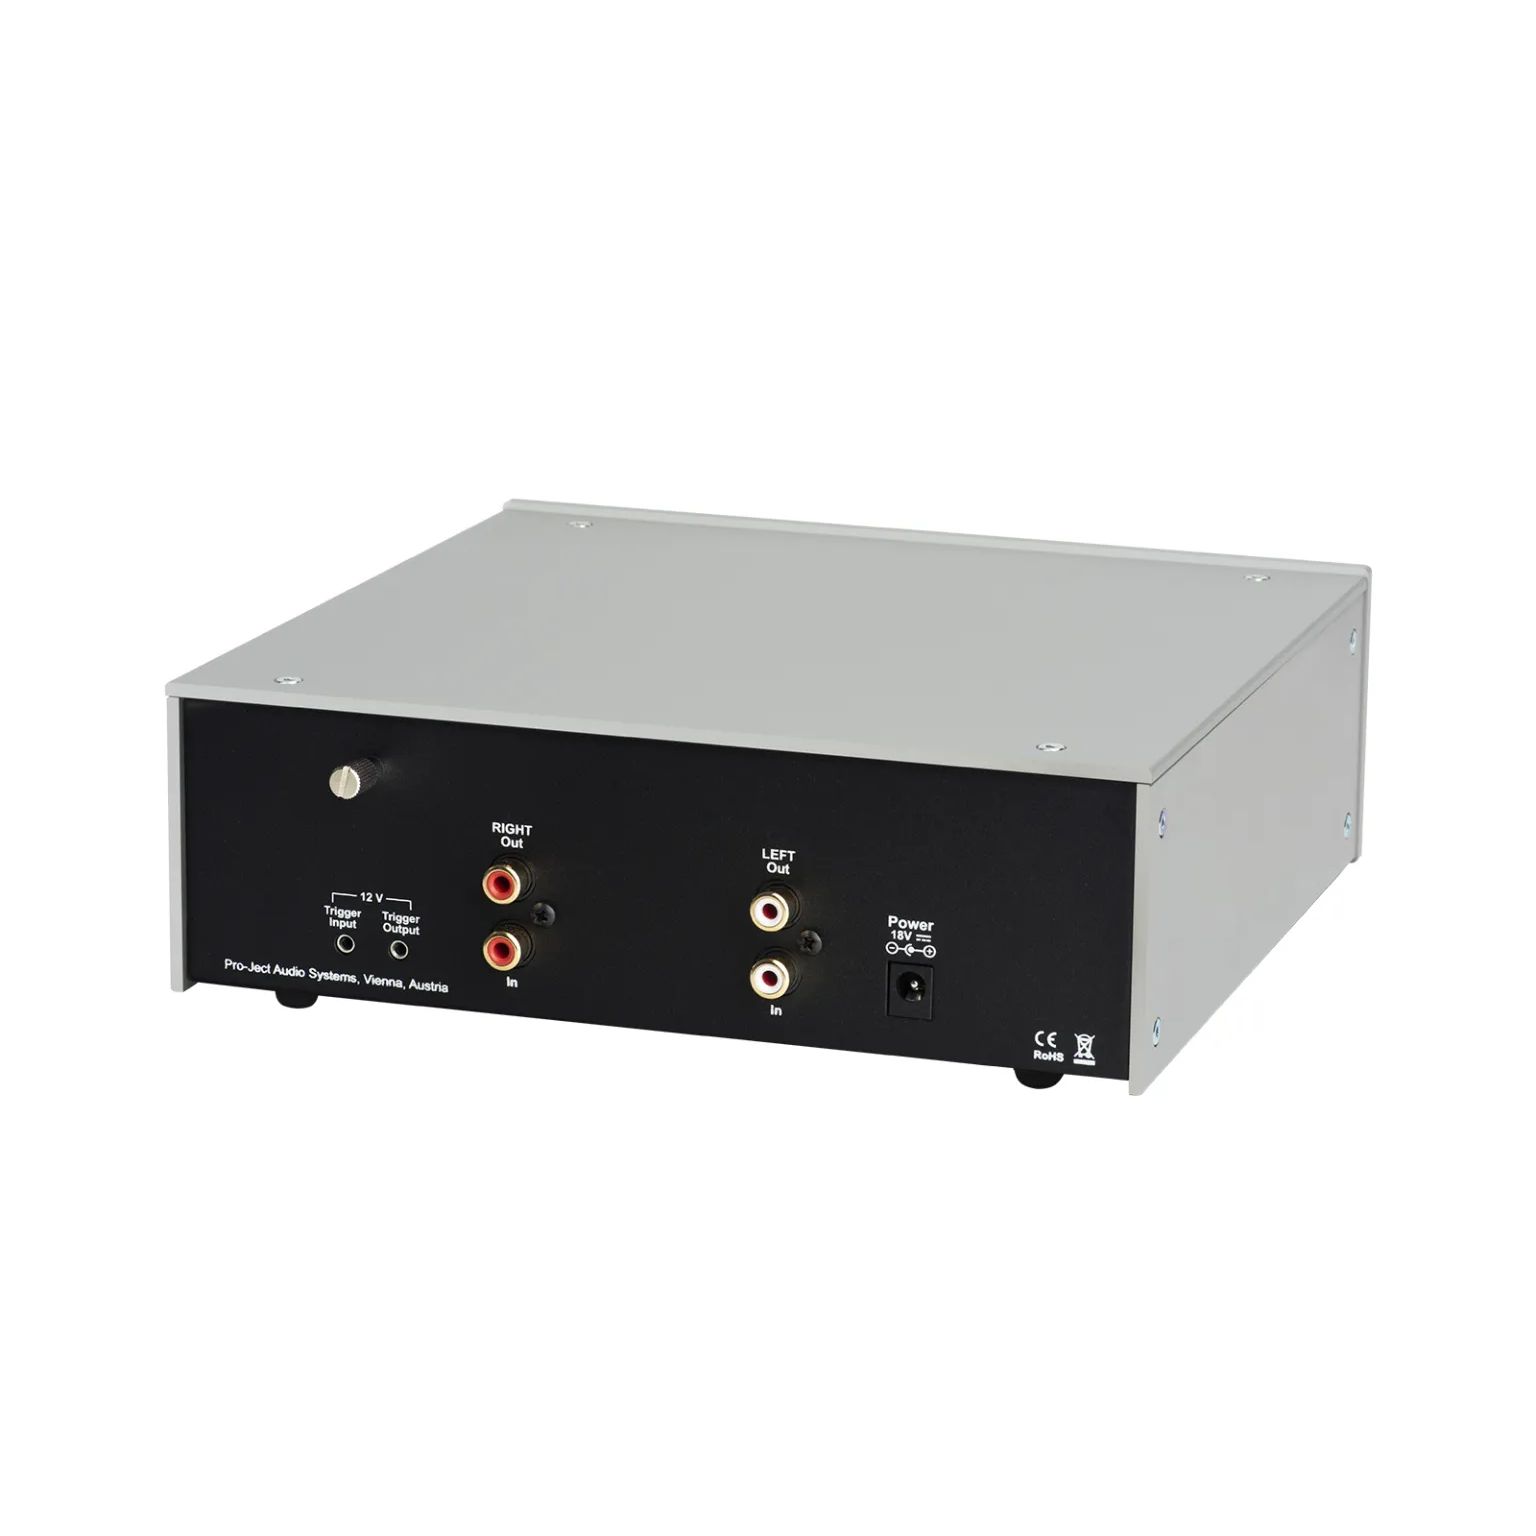 Pro-Ject Phono Box DS2 Silver по цене 48 526.43 ₽